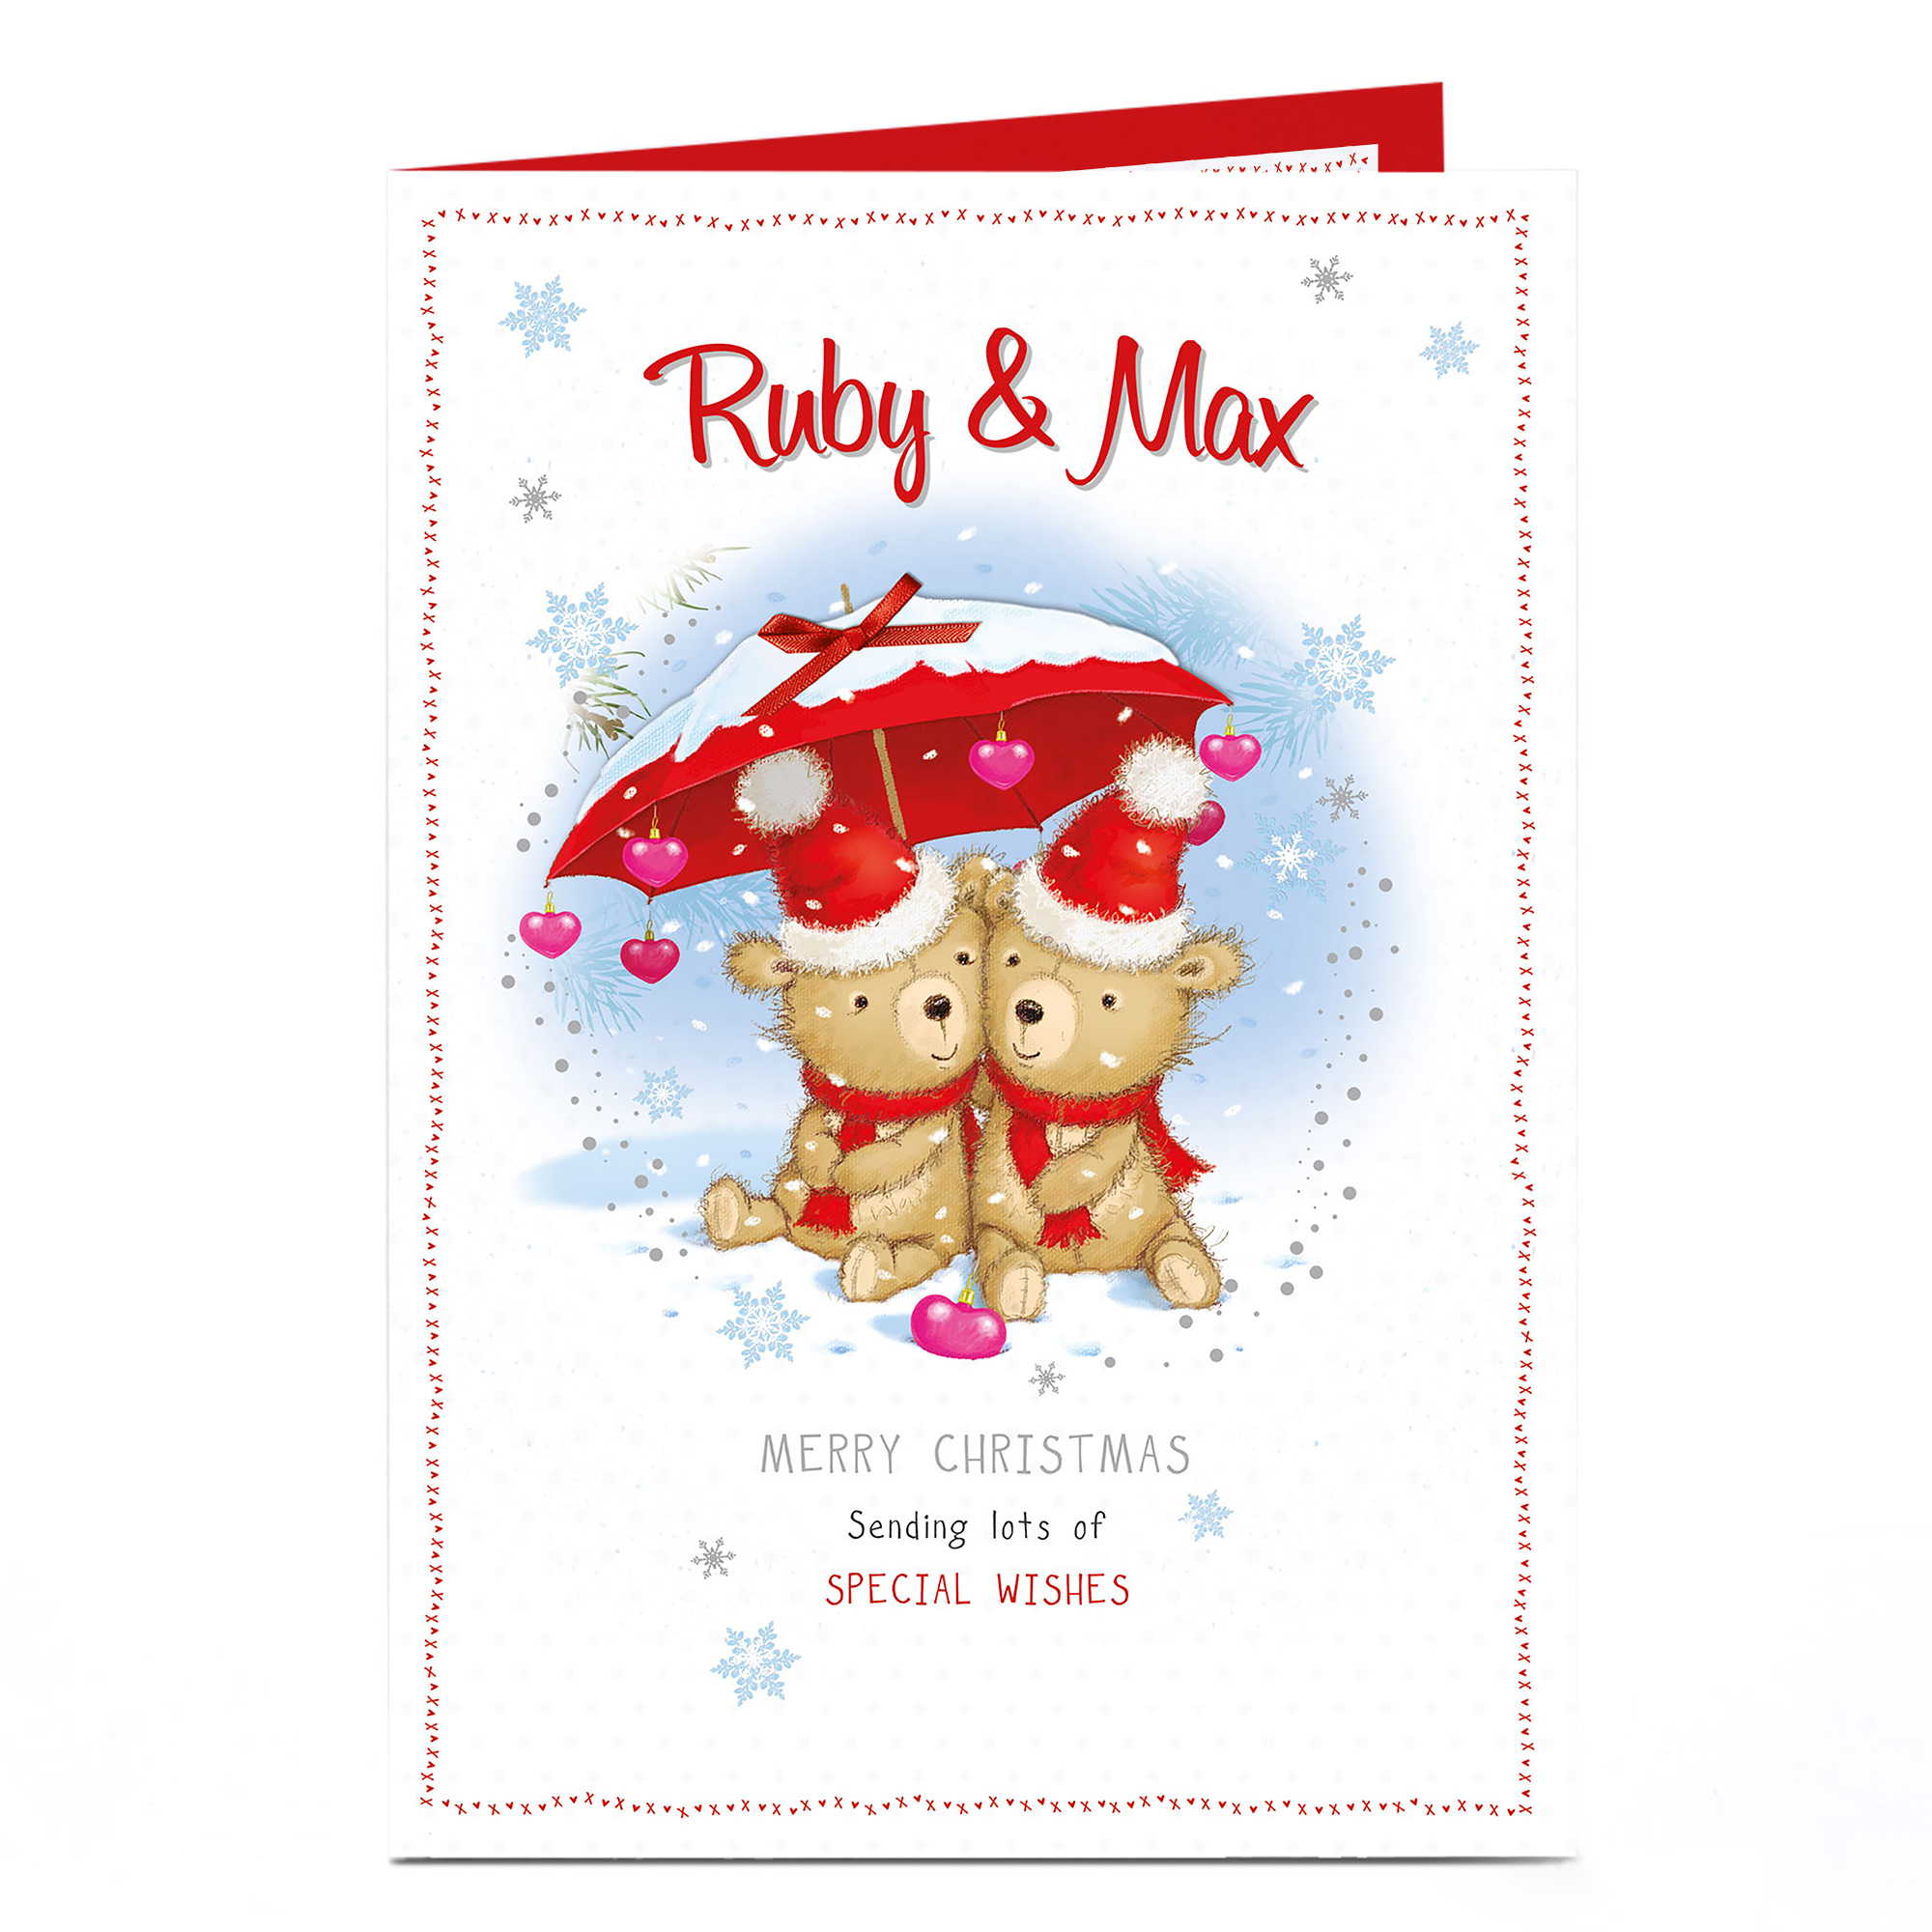 Personalised Christmas Card - Bears Under A Snowy Umbrella